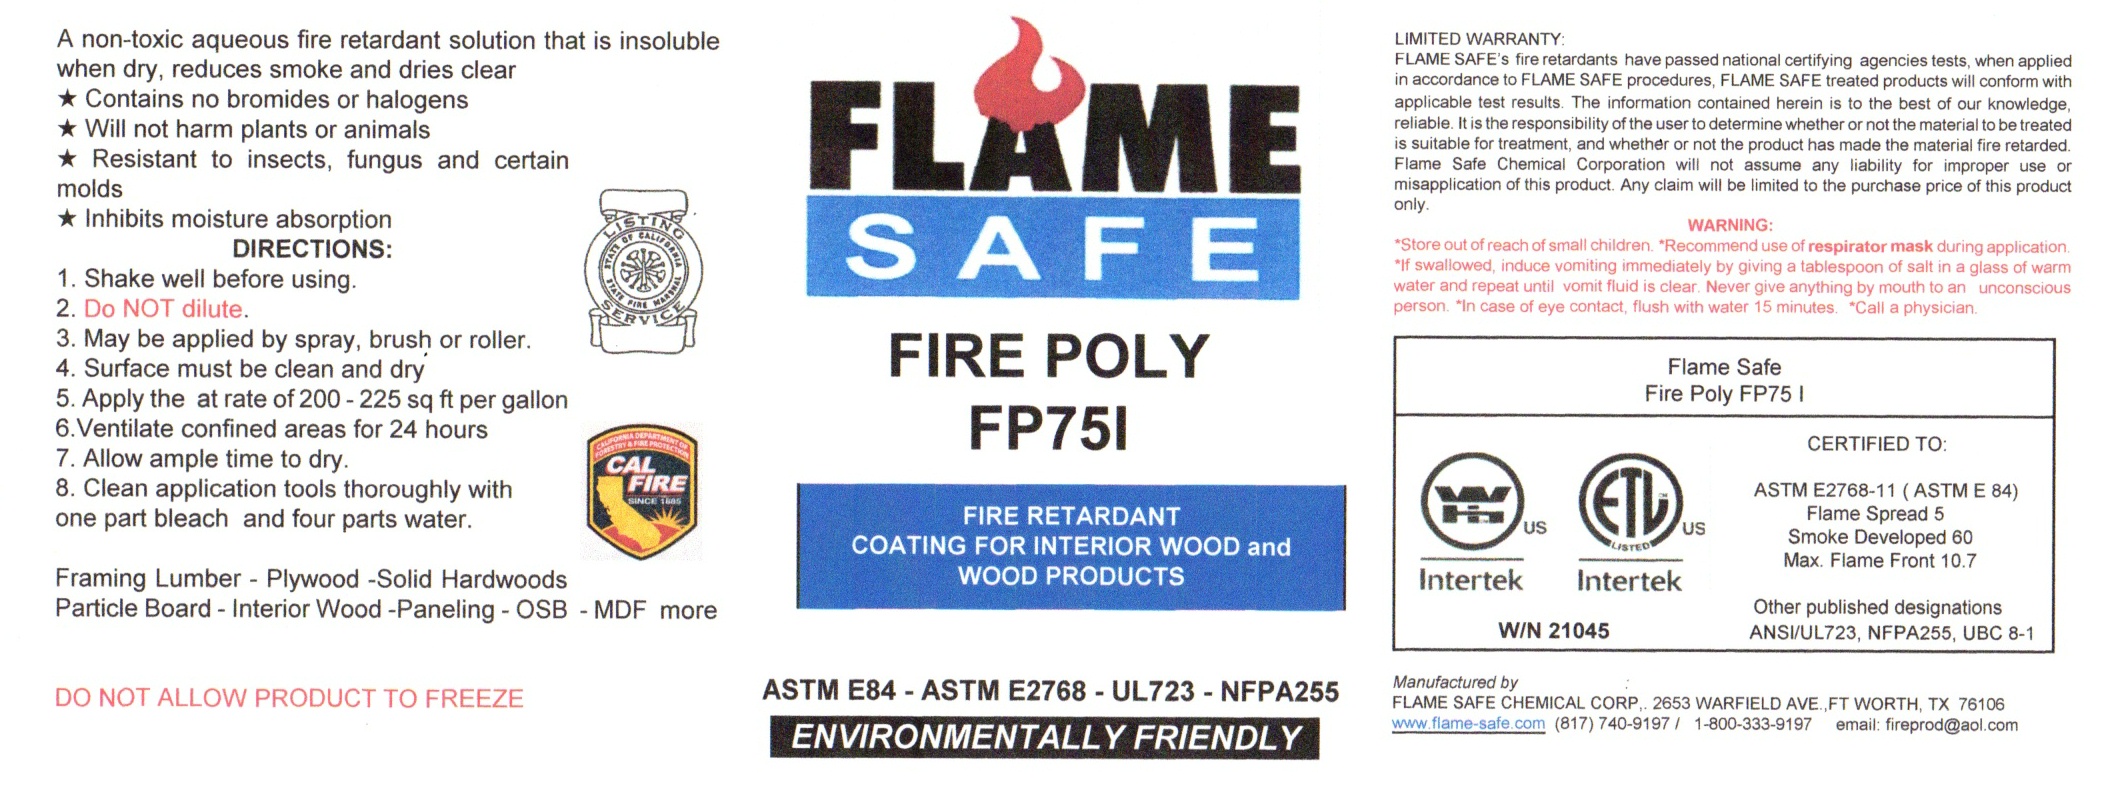 LABEL FIRE POLY FP75I